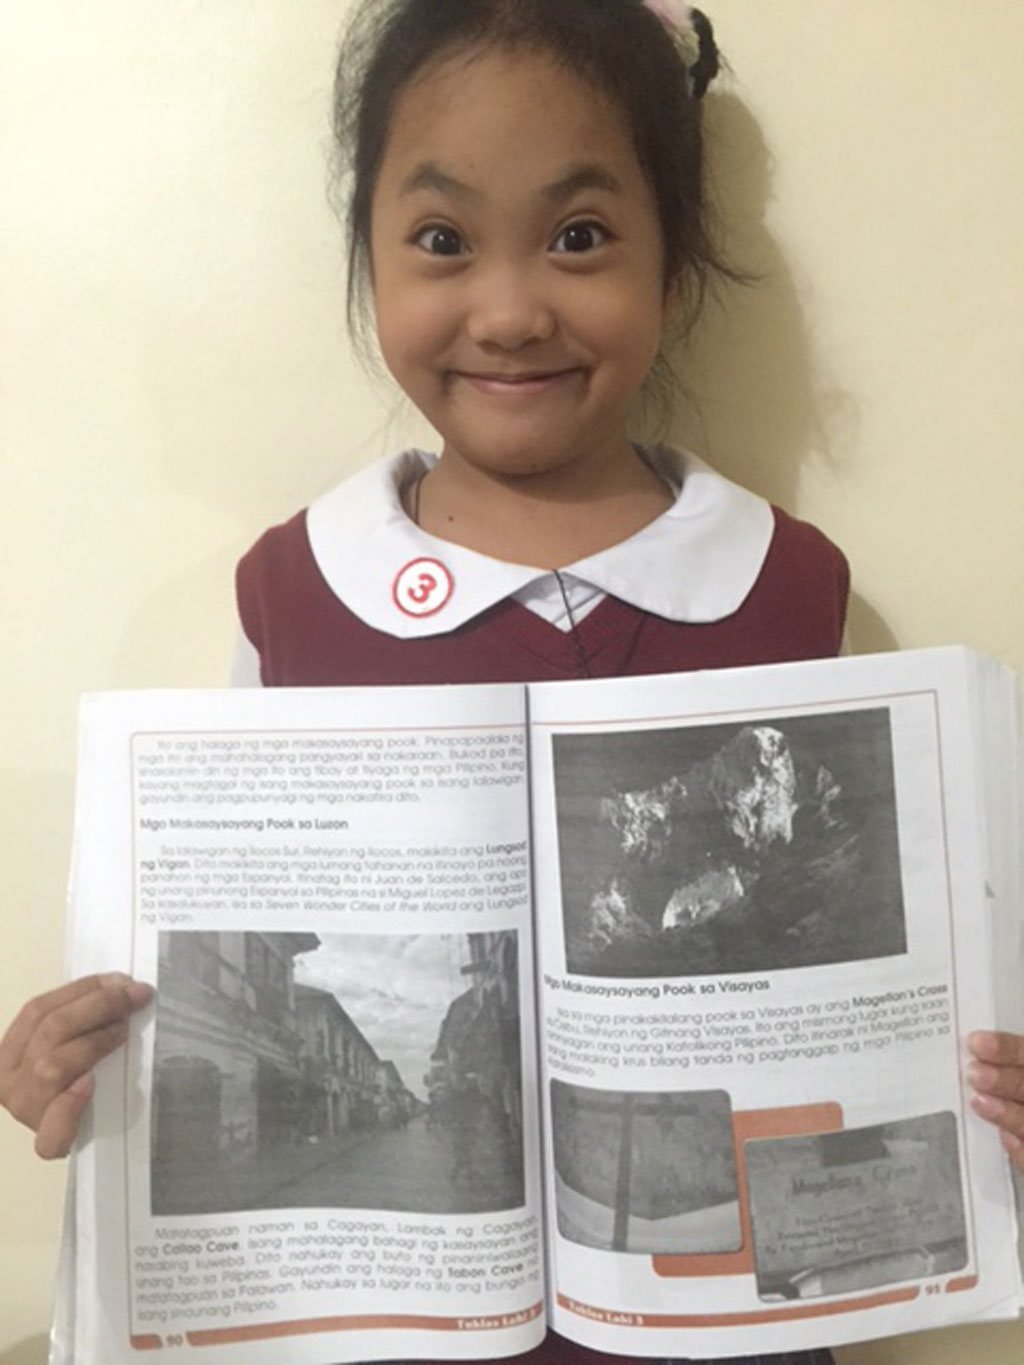 Angelica Faith Villafranca is clearly delighted that Vigan is both a New7Wonders City and featured in her coursework.